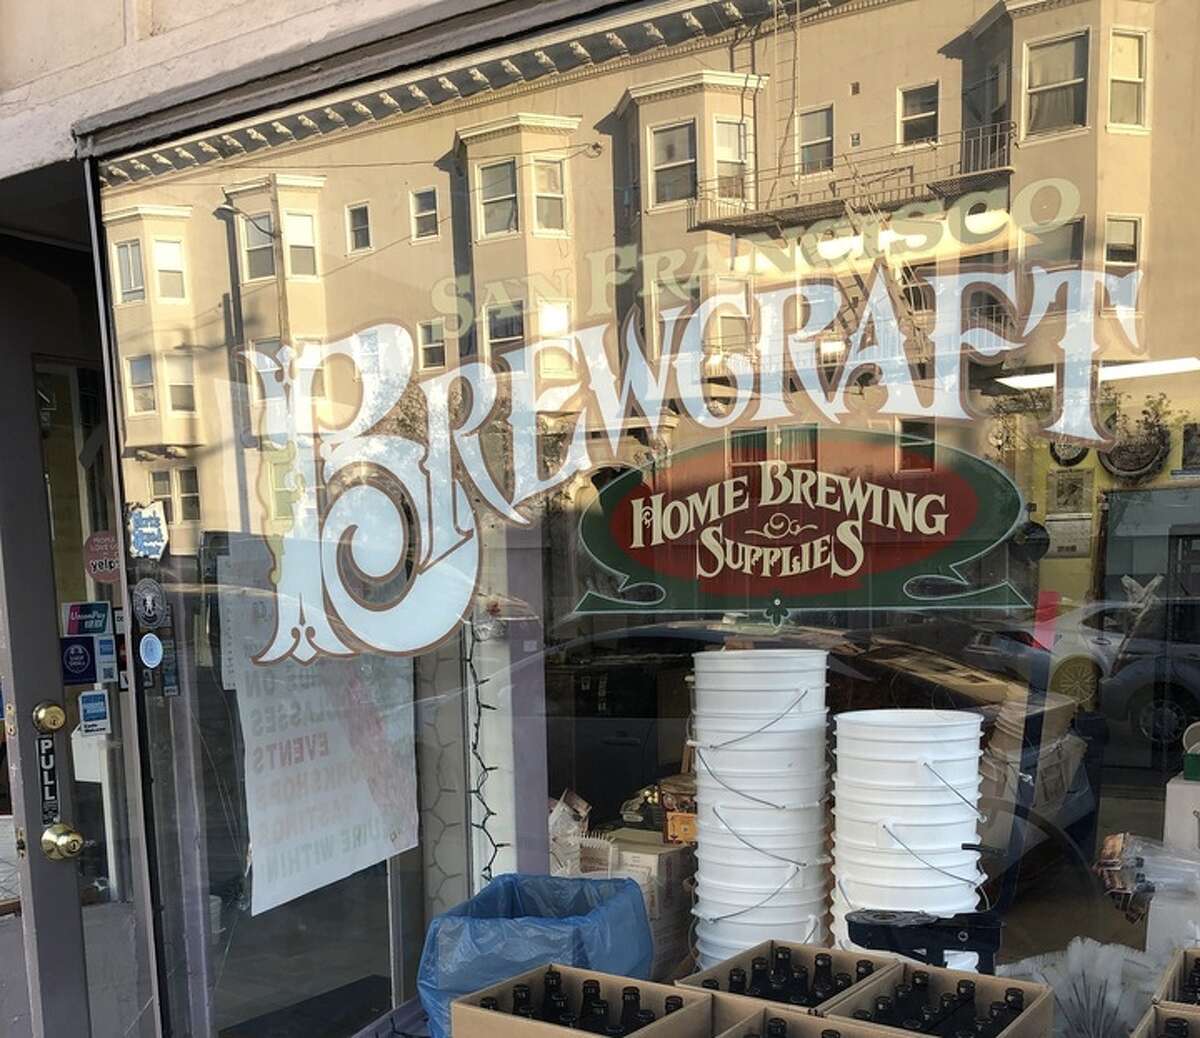 San Francisco Brewcraft, whose equipment and ingredients gave many local brewers their start, has closed. The Richmond District shop was known for a funky, community feel.